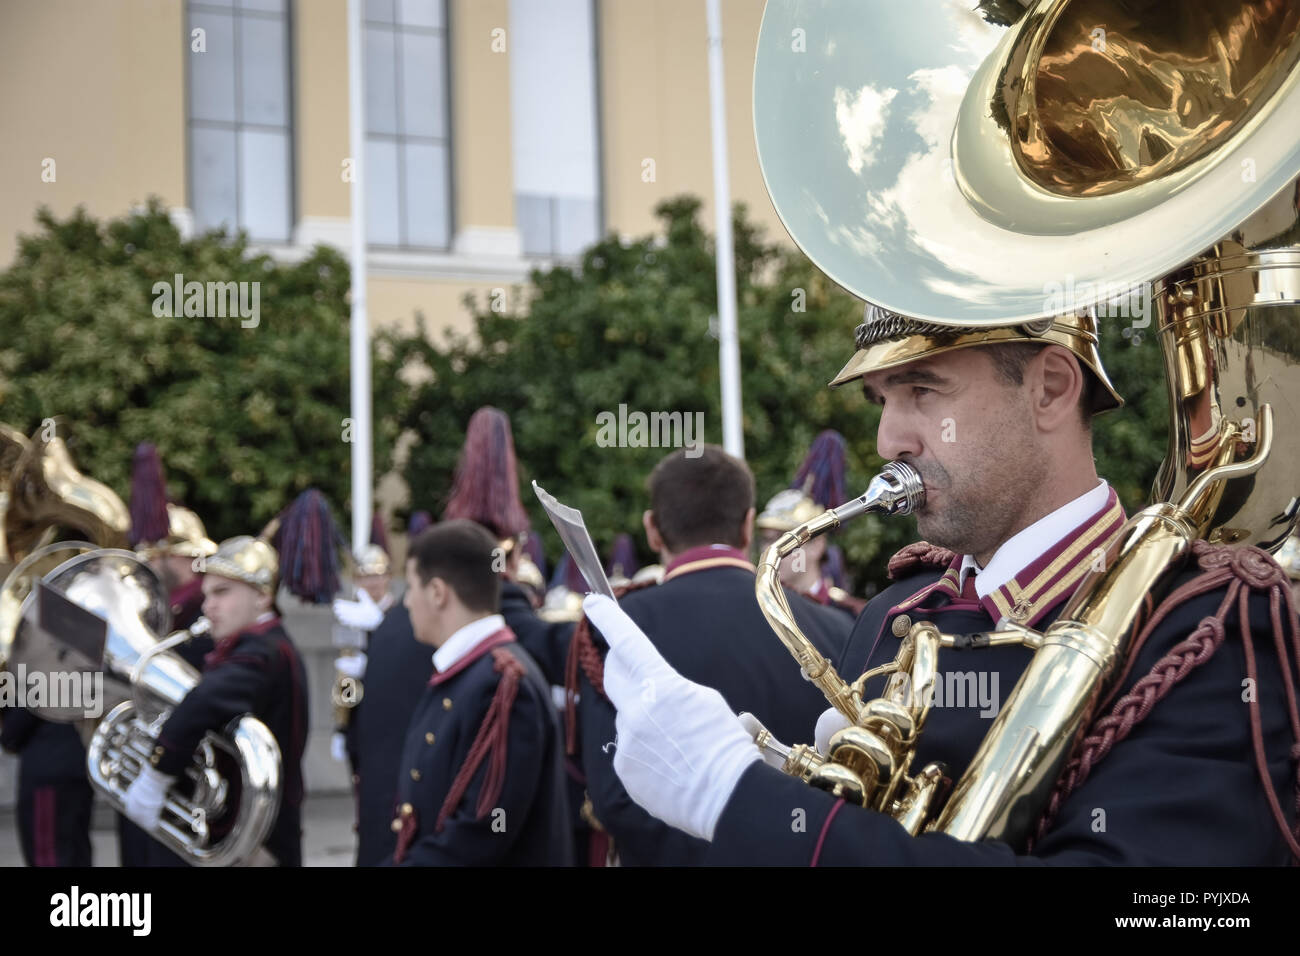 Ioannis Metaxas High Resolution Stock Photography and Images - Alamy